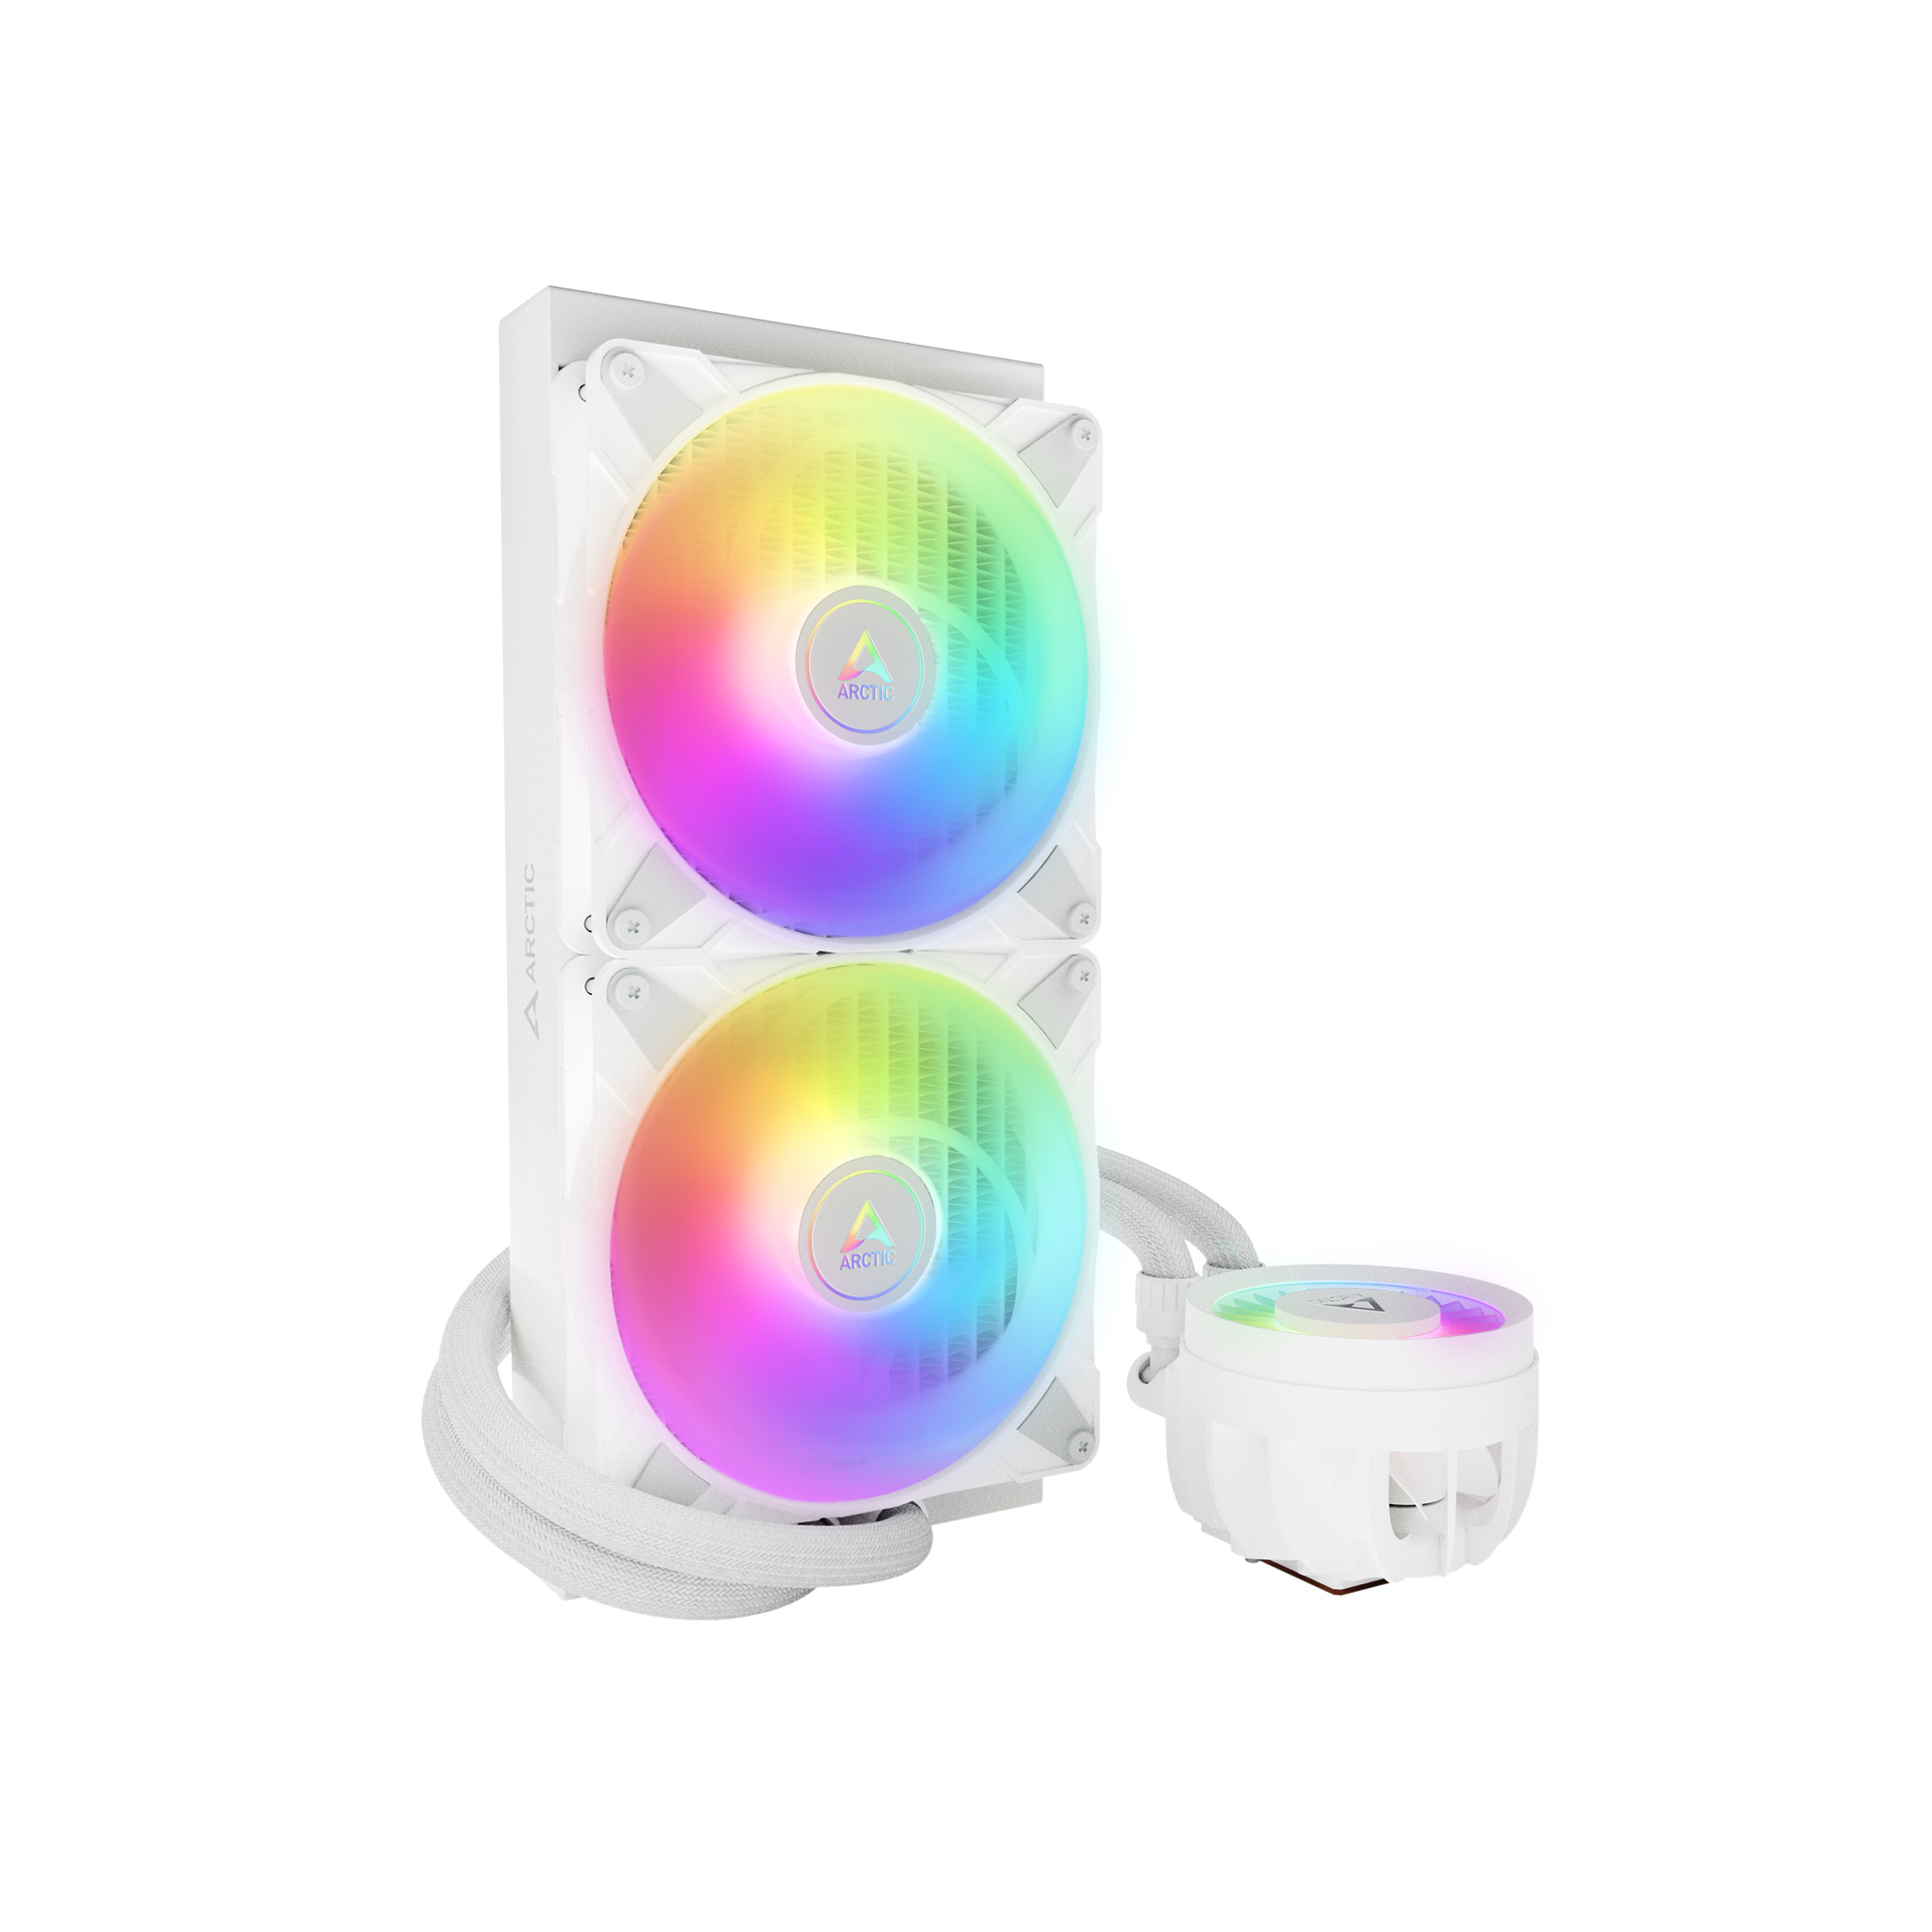 ARCTIC Liquid Freezer III - 280 A-RGB (White) : All-in-One CPU Water Cooler with 280mm radiator and